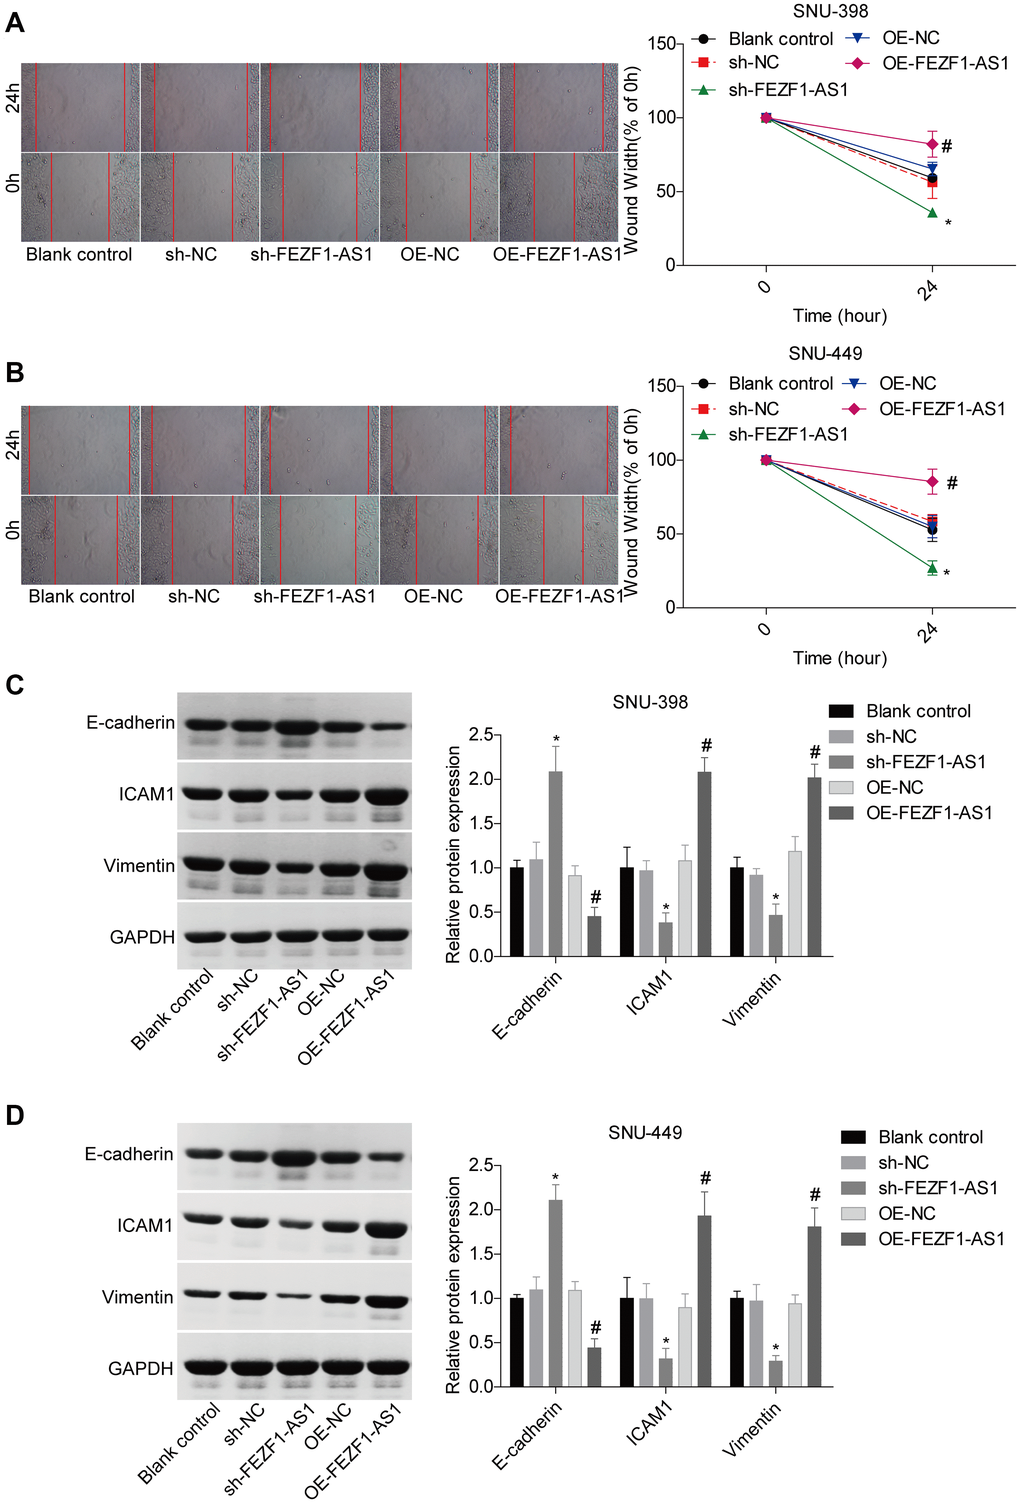 FEZF1-AS1 promoted the migration and EMT of HCC cells. (A, B) Wound healing assay was adopt to detect the migration of SNU-398 and SNU-449 cells, *P #P C, D) Western blot was used to detect the expression levels of EMT markers, E-cadherin, ICAM1 and Vimentin, *P #P 